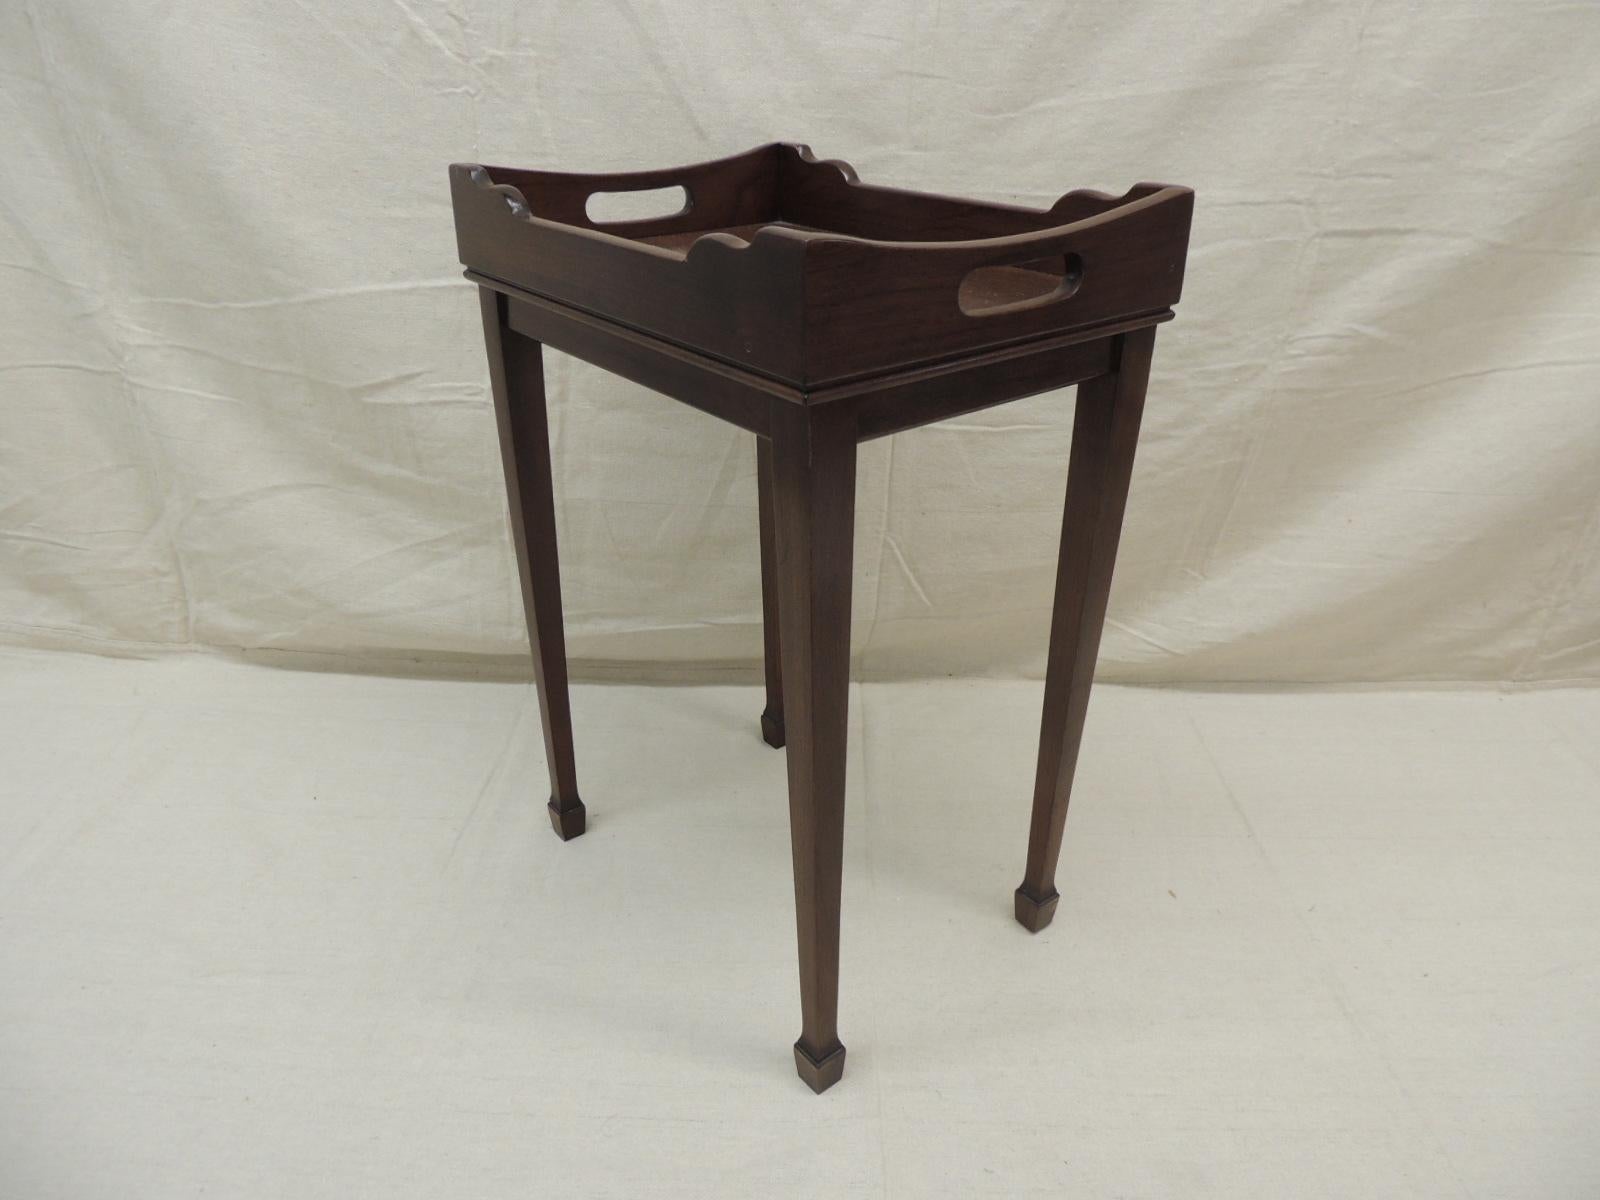 Vintage Ethan Allen side tray table with tapered legs
Measures: 9.5” D x 13